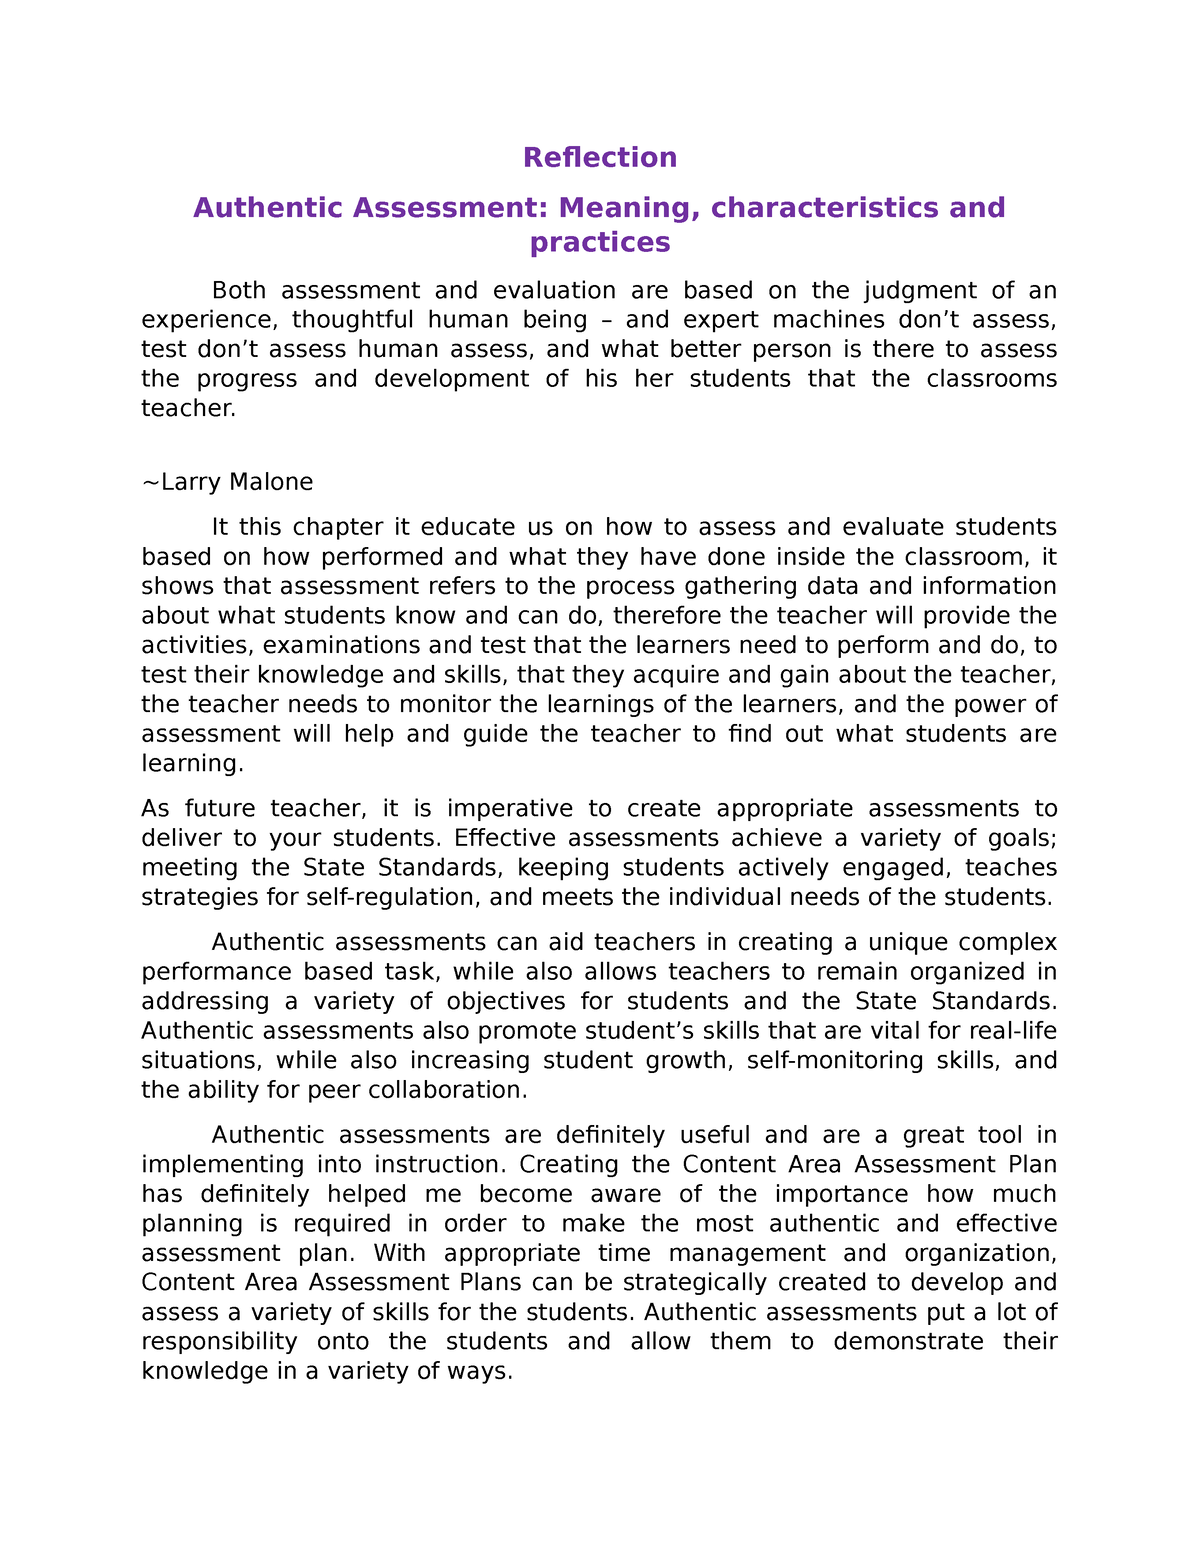 essay about authentic assessment